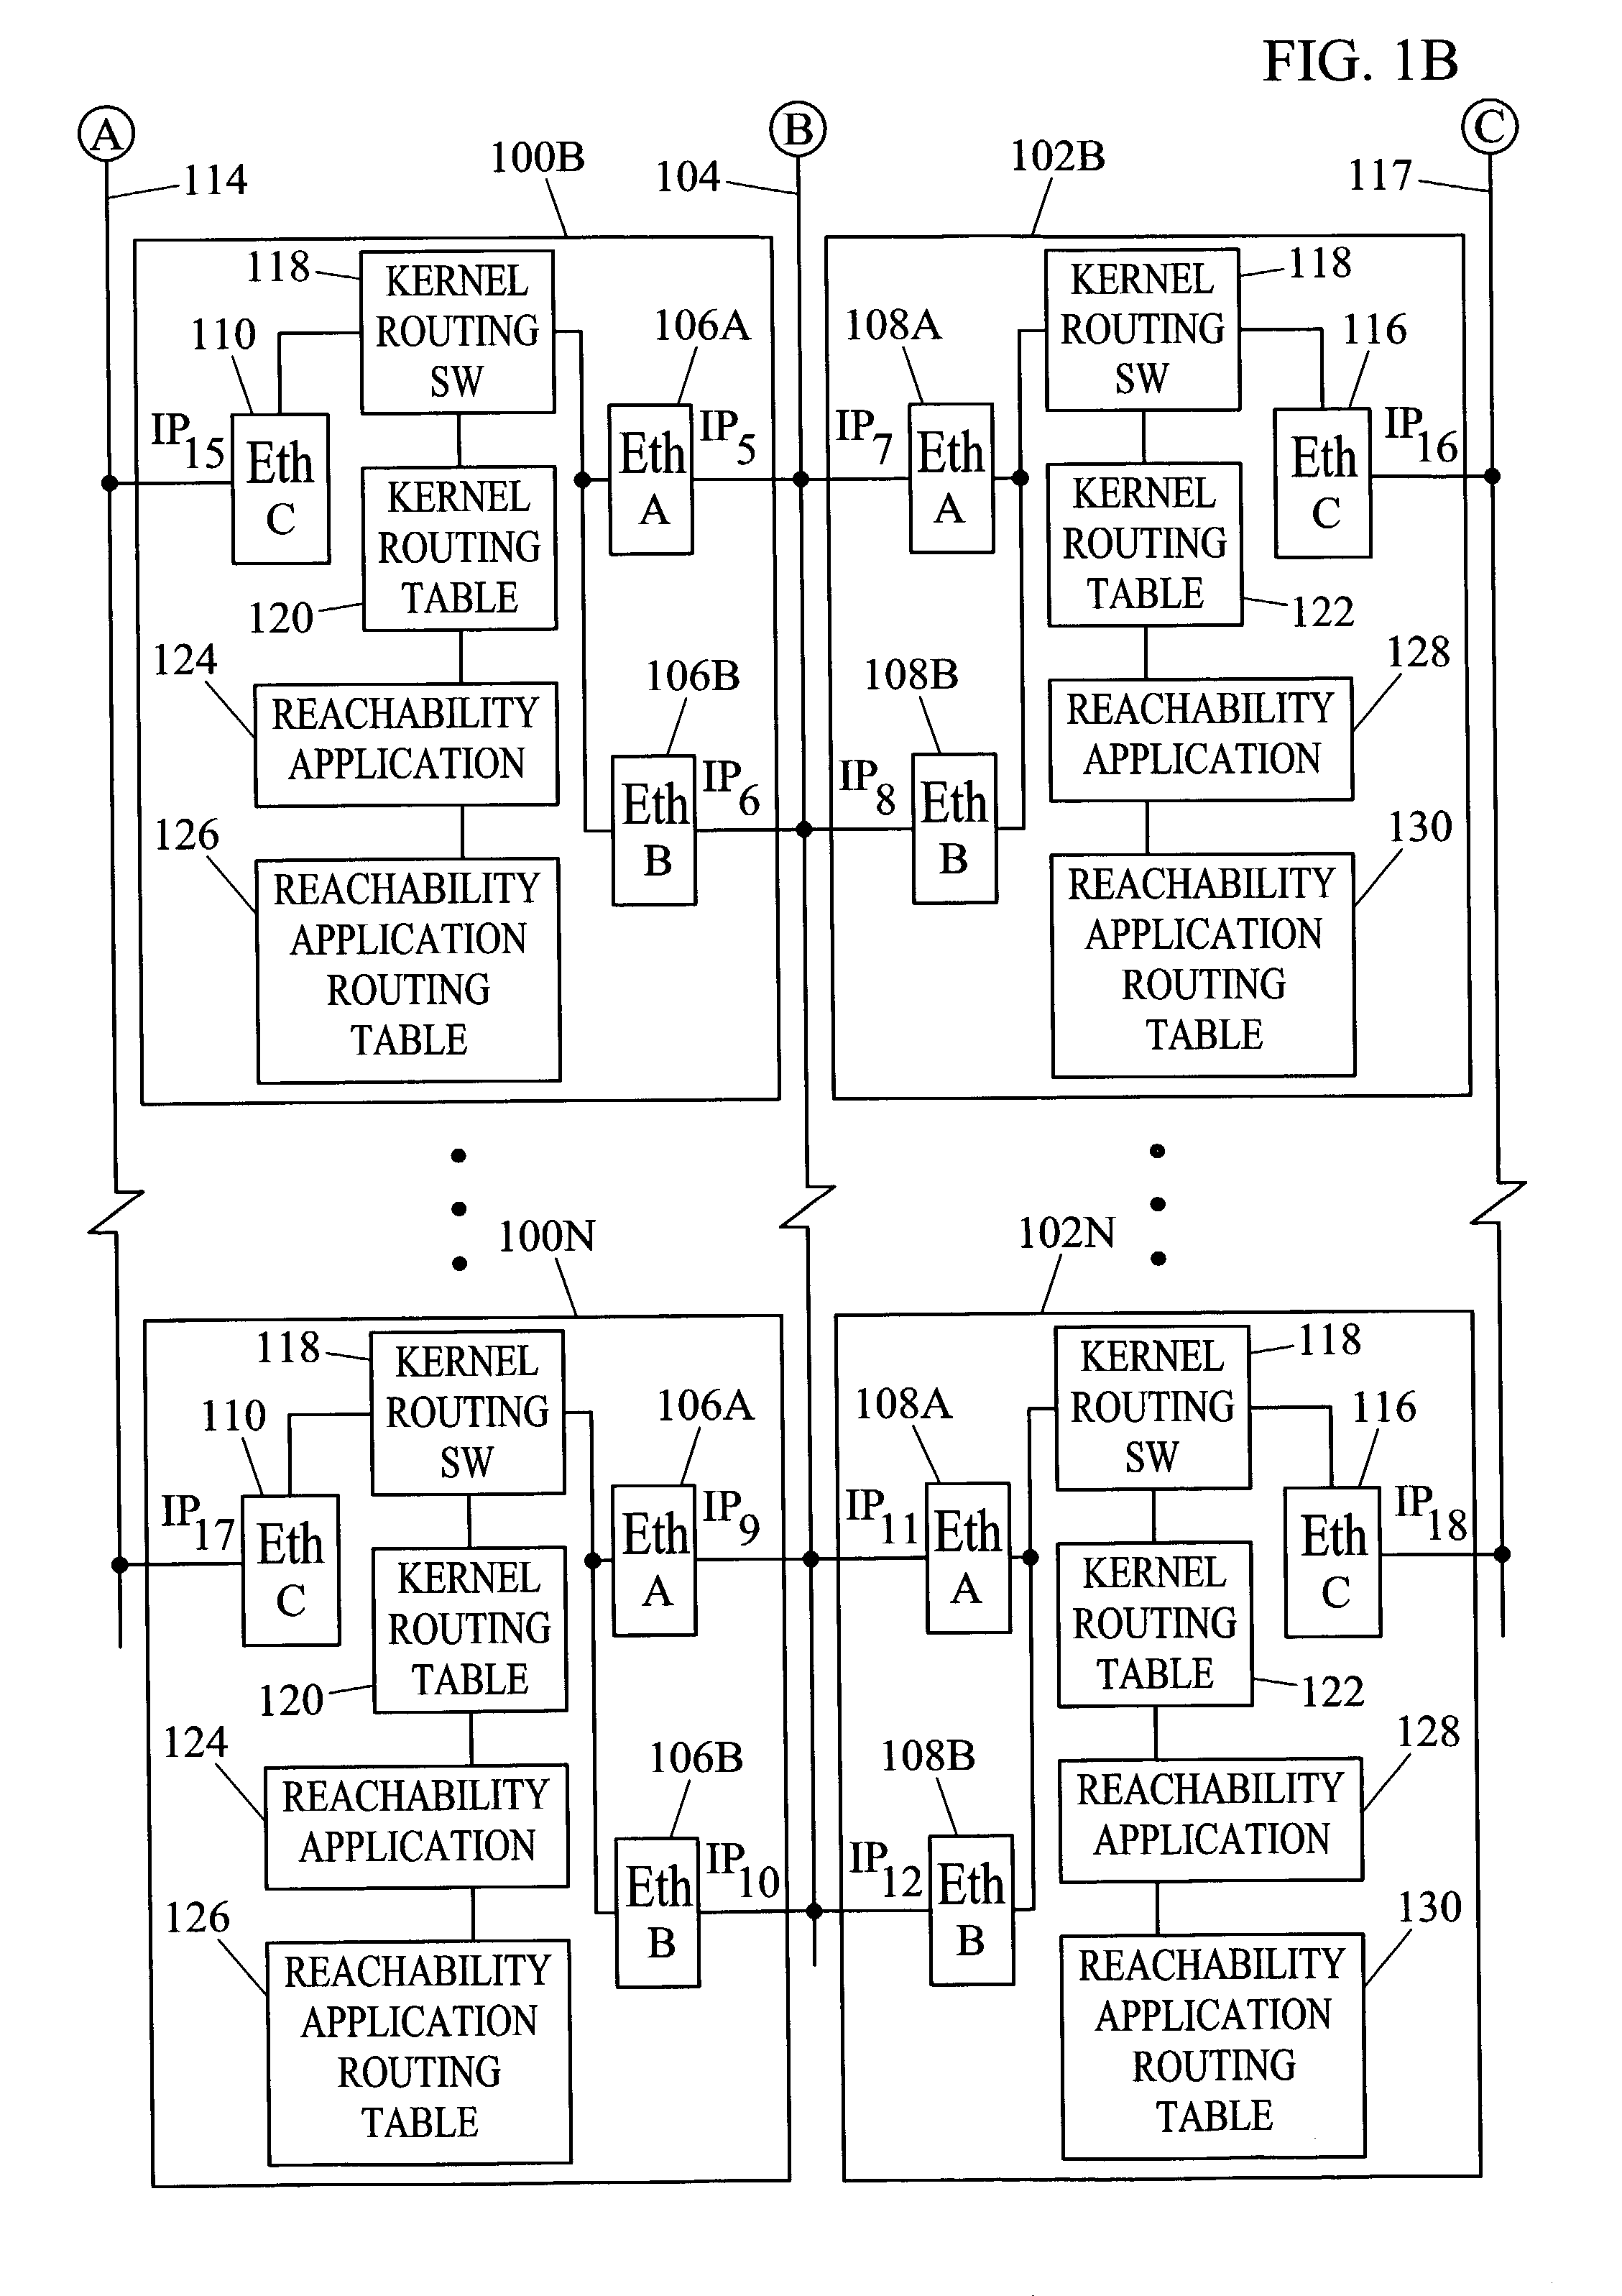 Methods and systems for exchanging reachability information and for switching traffic between redundant interfaces in a network cluster